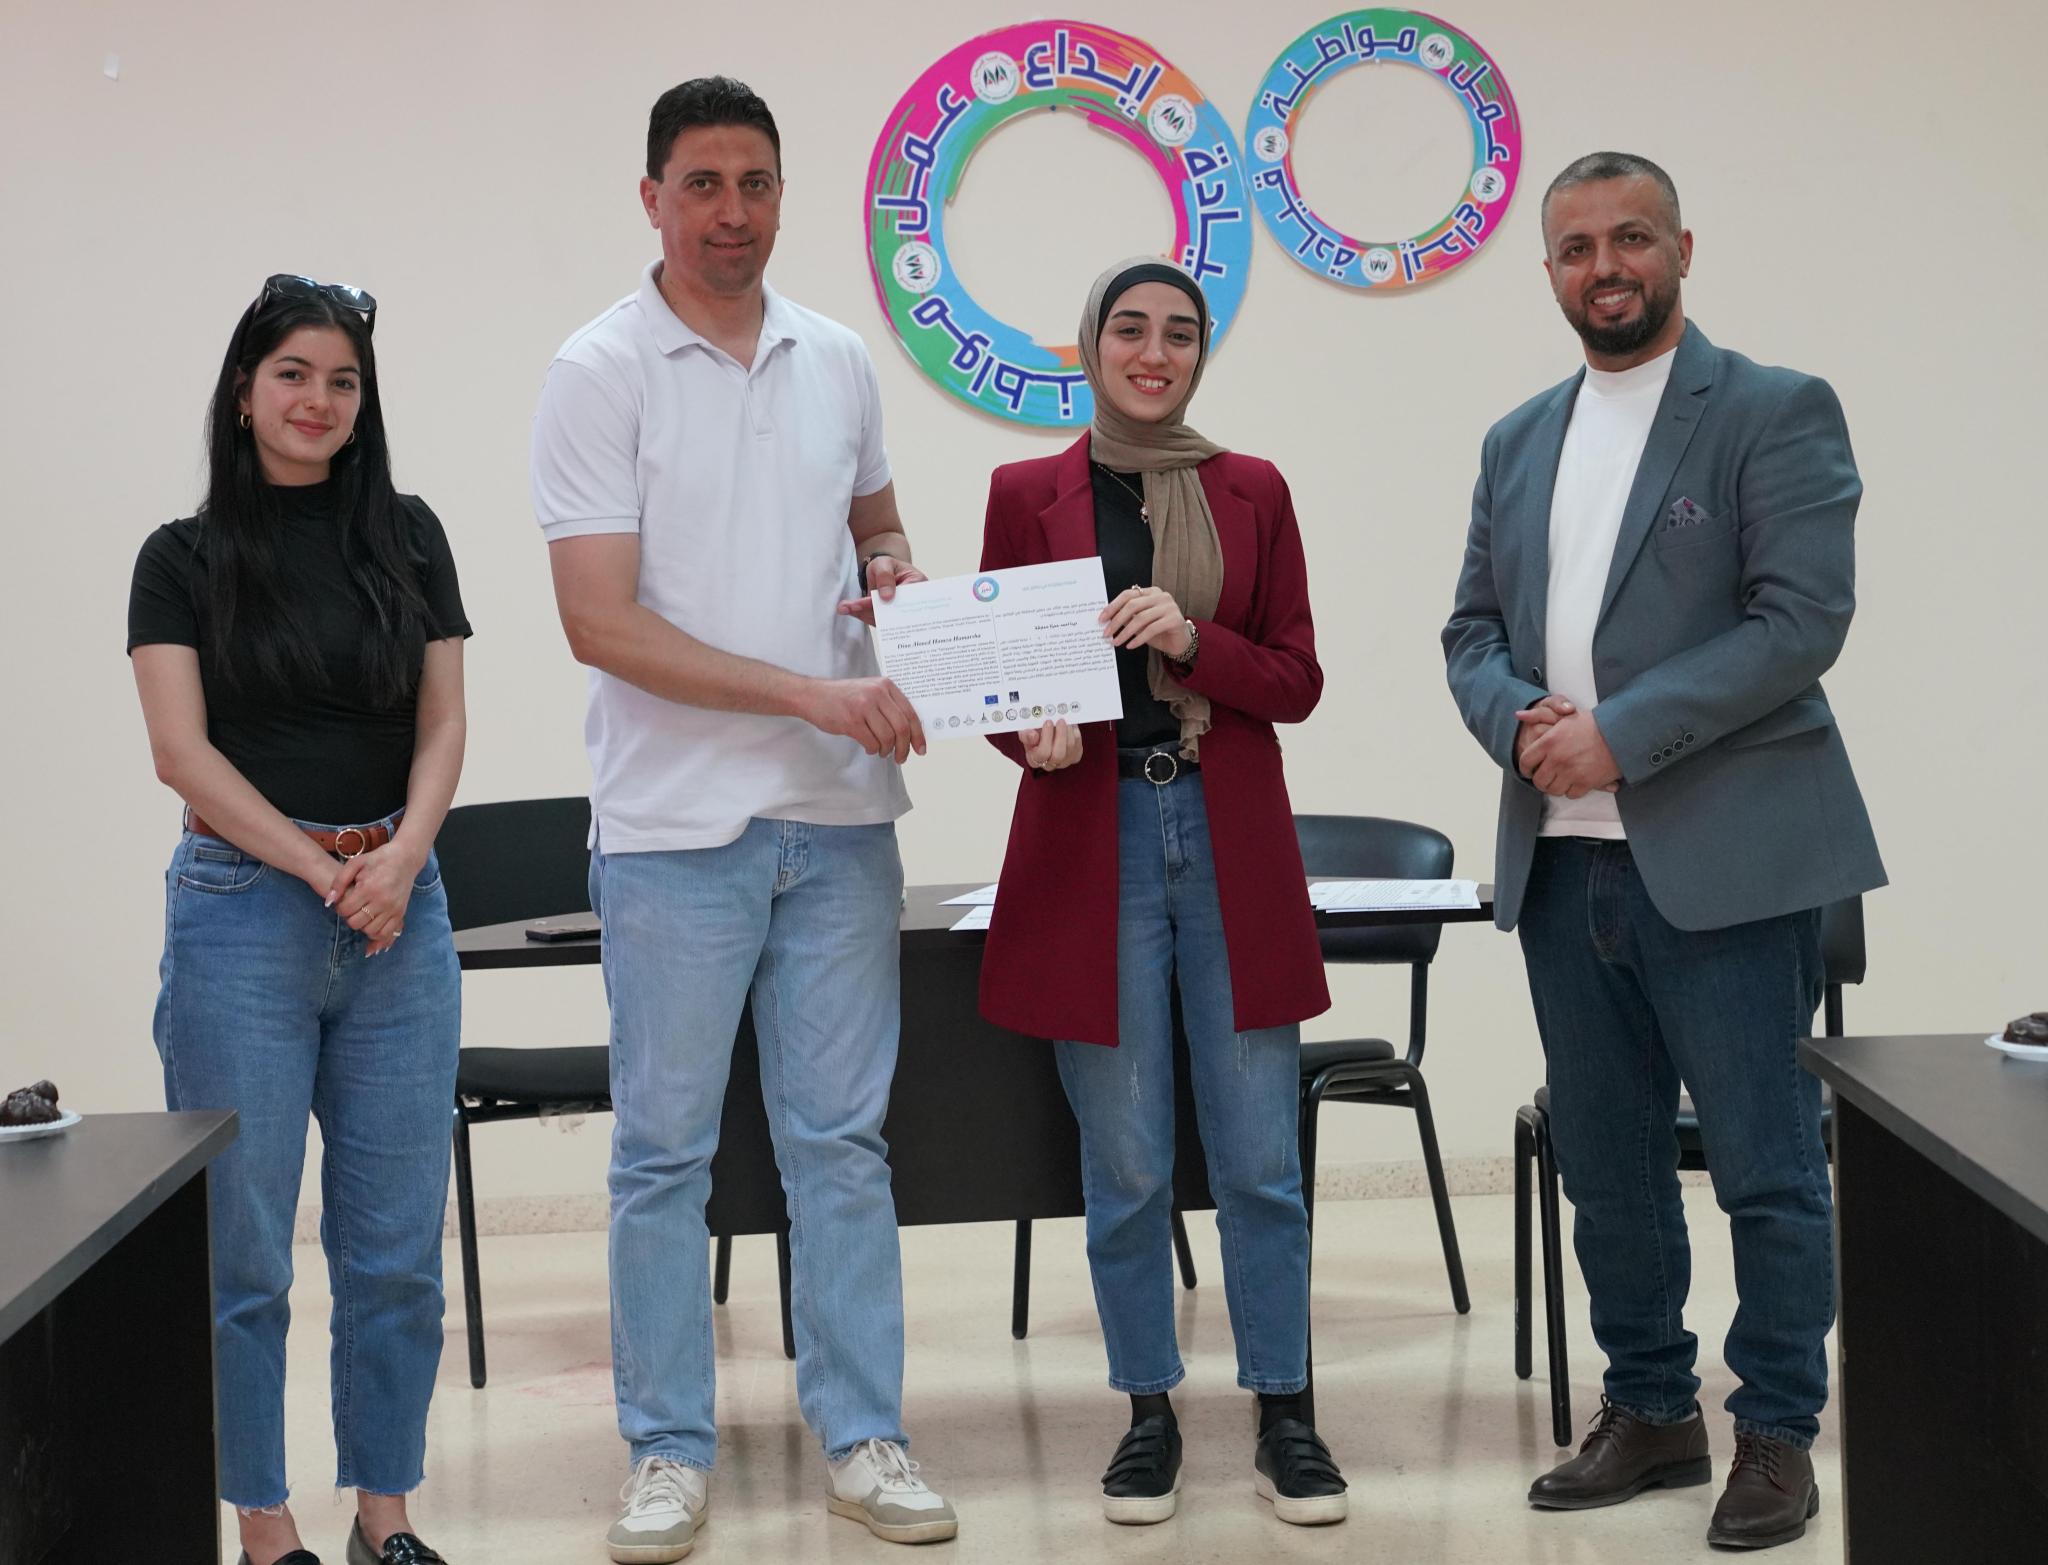 The Arab American University and Sharek Forum Hold an Event to Award Certificates of Excellence